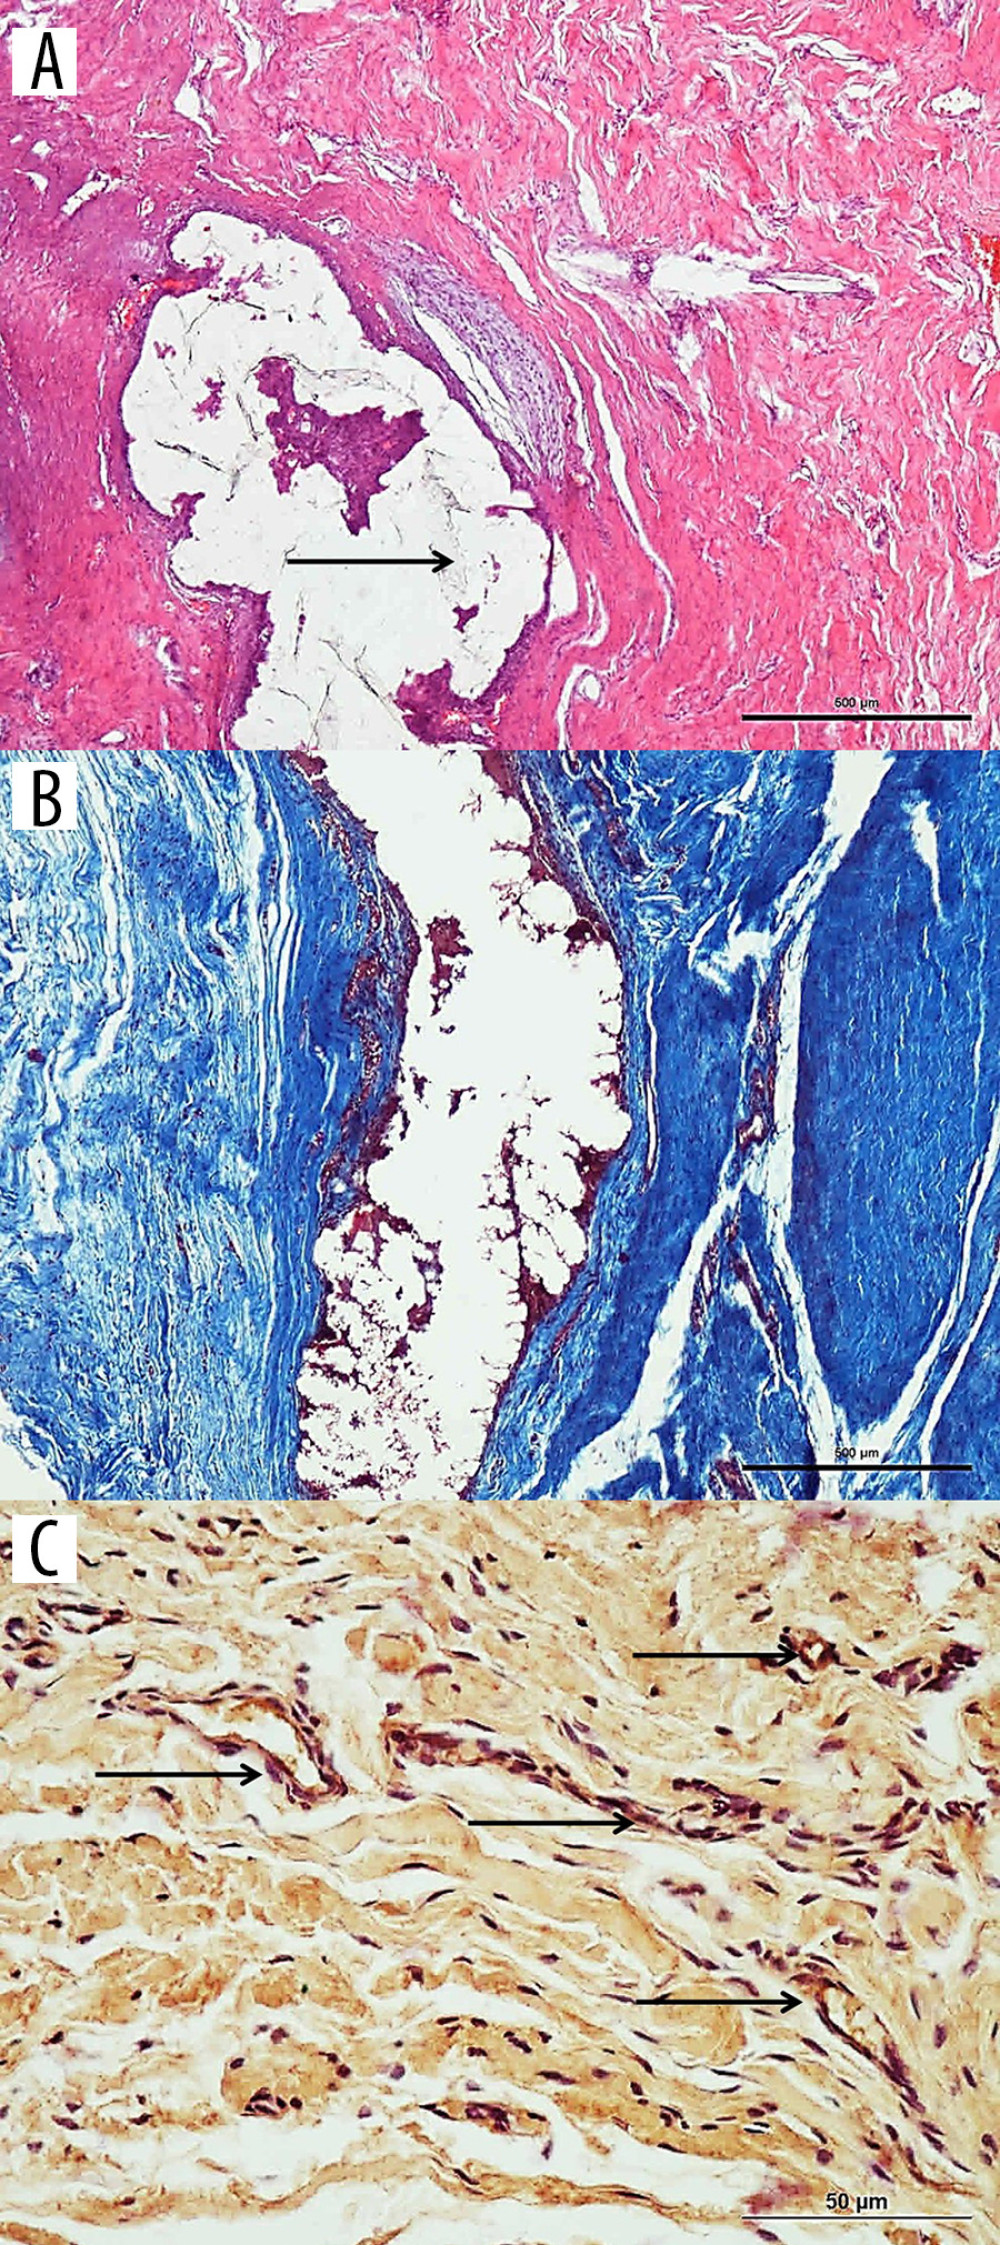 Image from experimental group at week 6. (A) Decreased amount of cyanoacrylate (→) can be seen (hematoxylin and eosin stain, 4×). (B) Irregular collagen sequence is outstanding (Masson trichrome, 4×). (C) It is seen that vascular endothelial growth factor-stained vascular structures (→) were increased at week 6 when compared to other groups (20×).